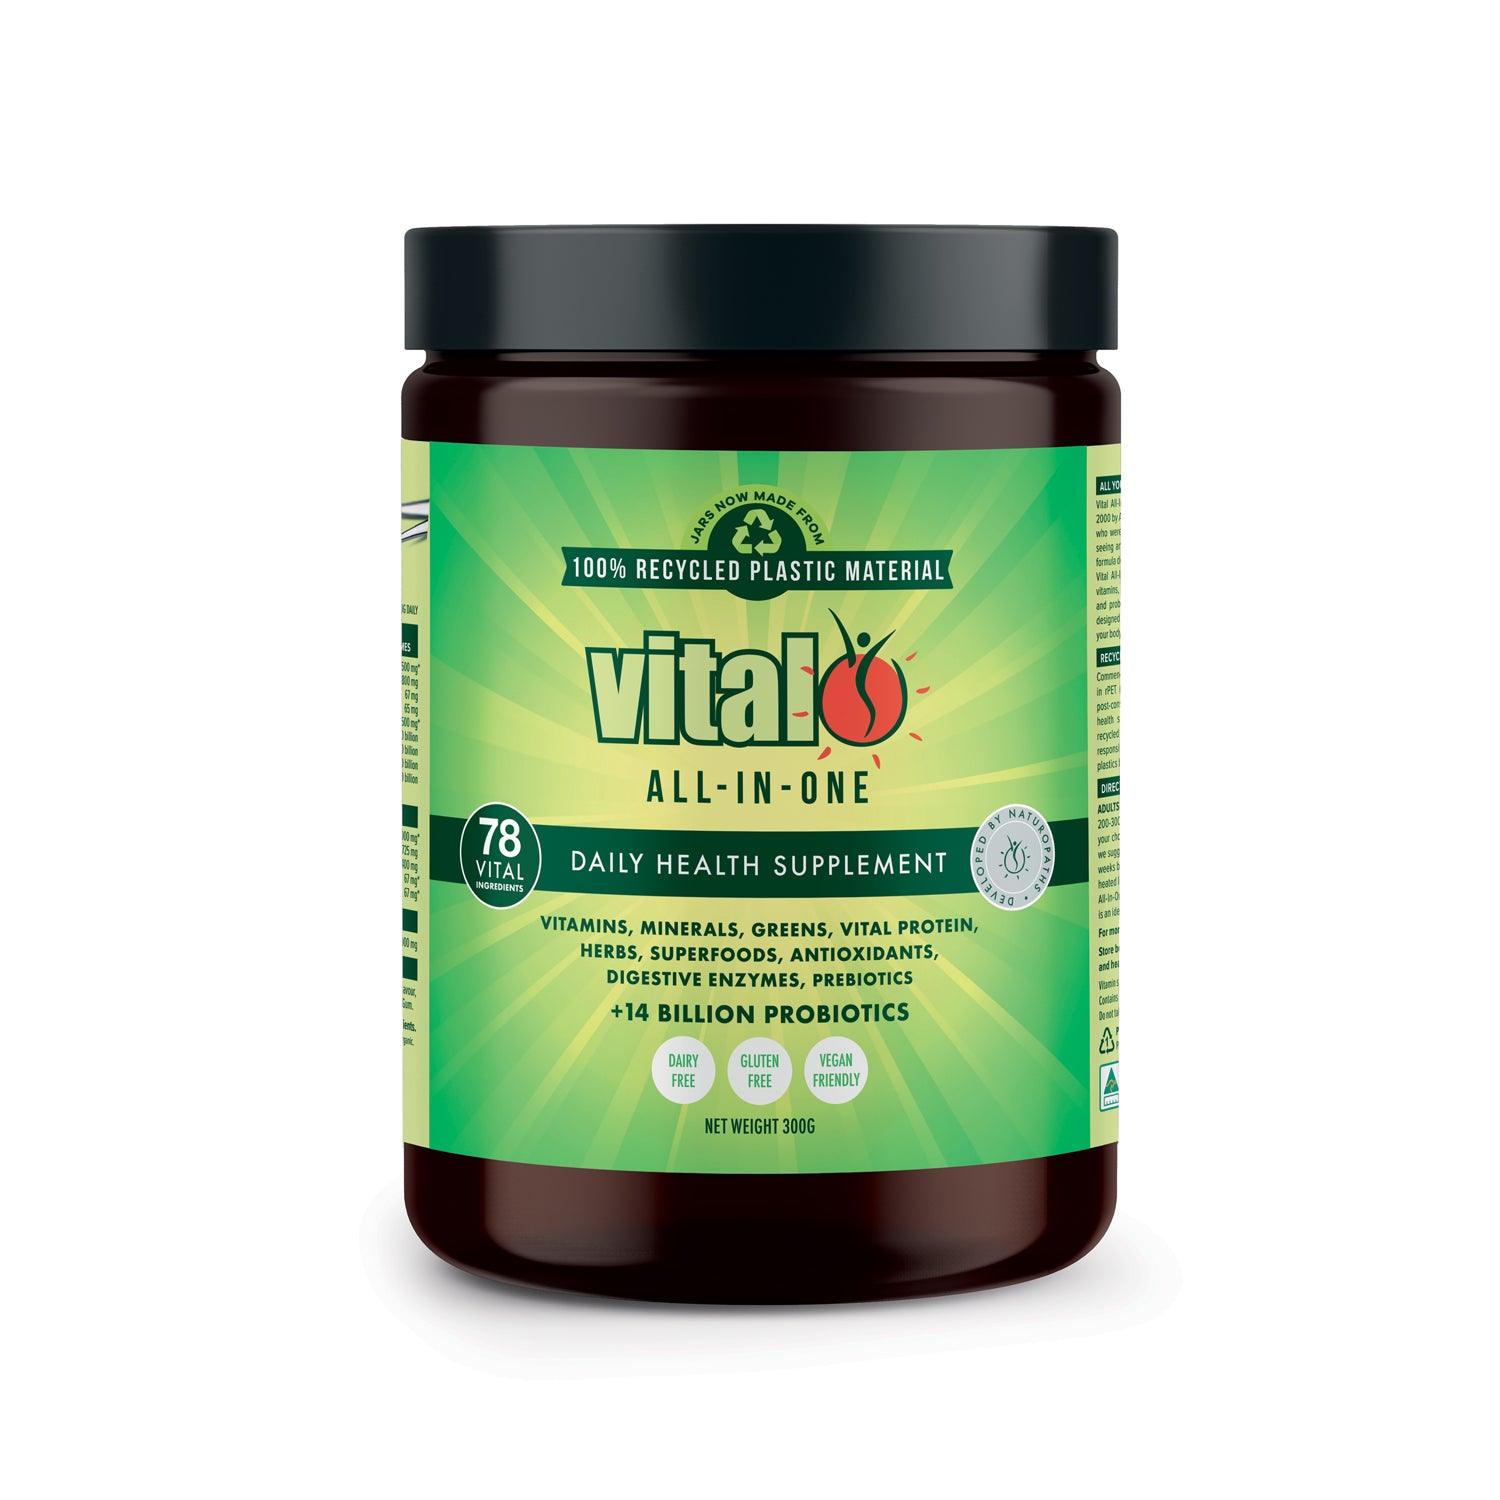 Vital All in One Daily Health Supplement